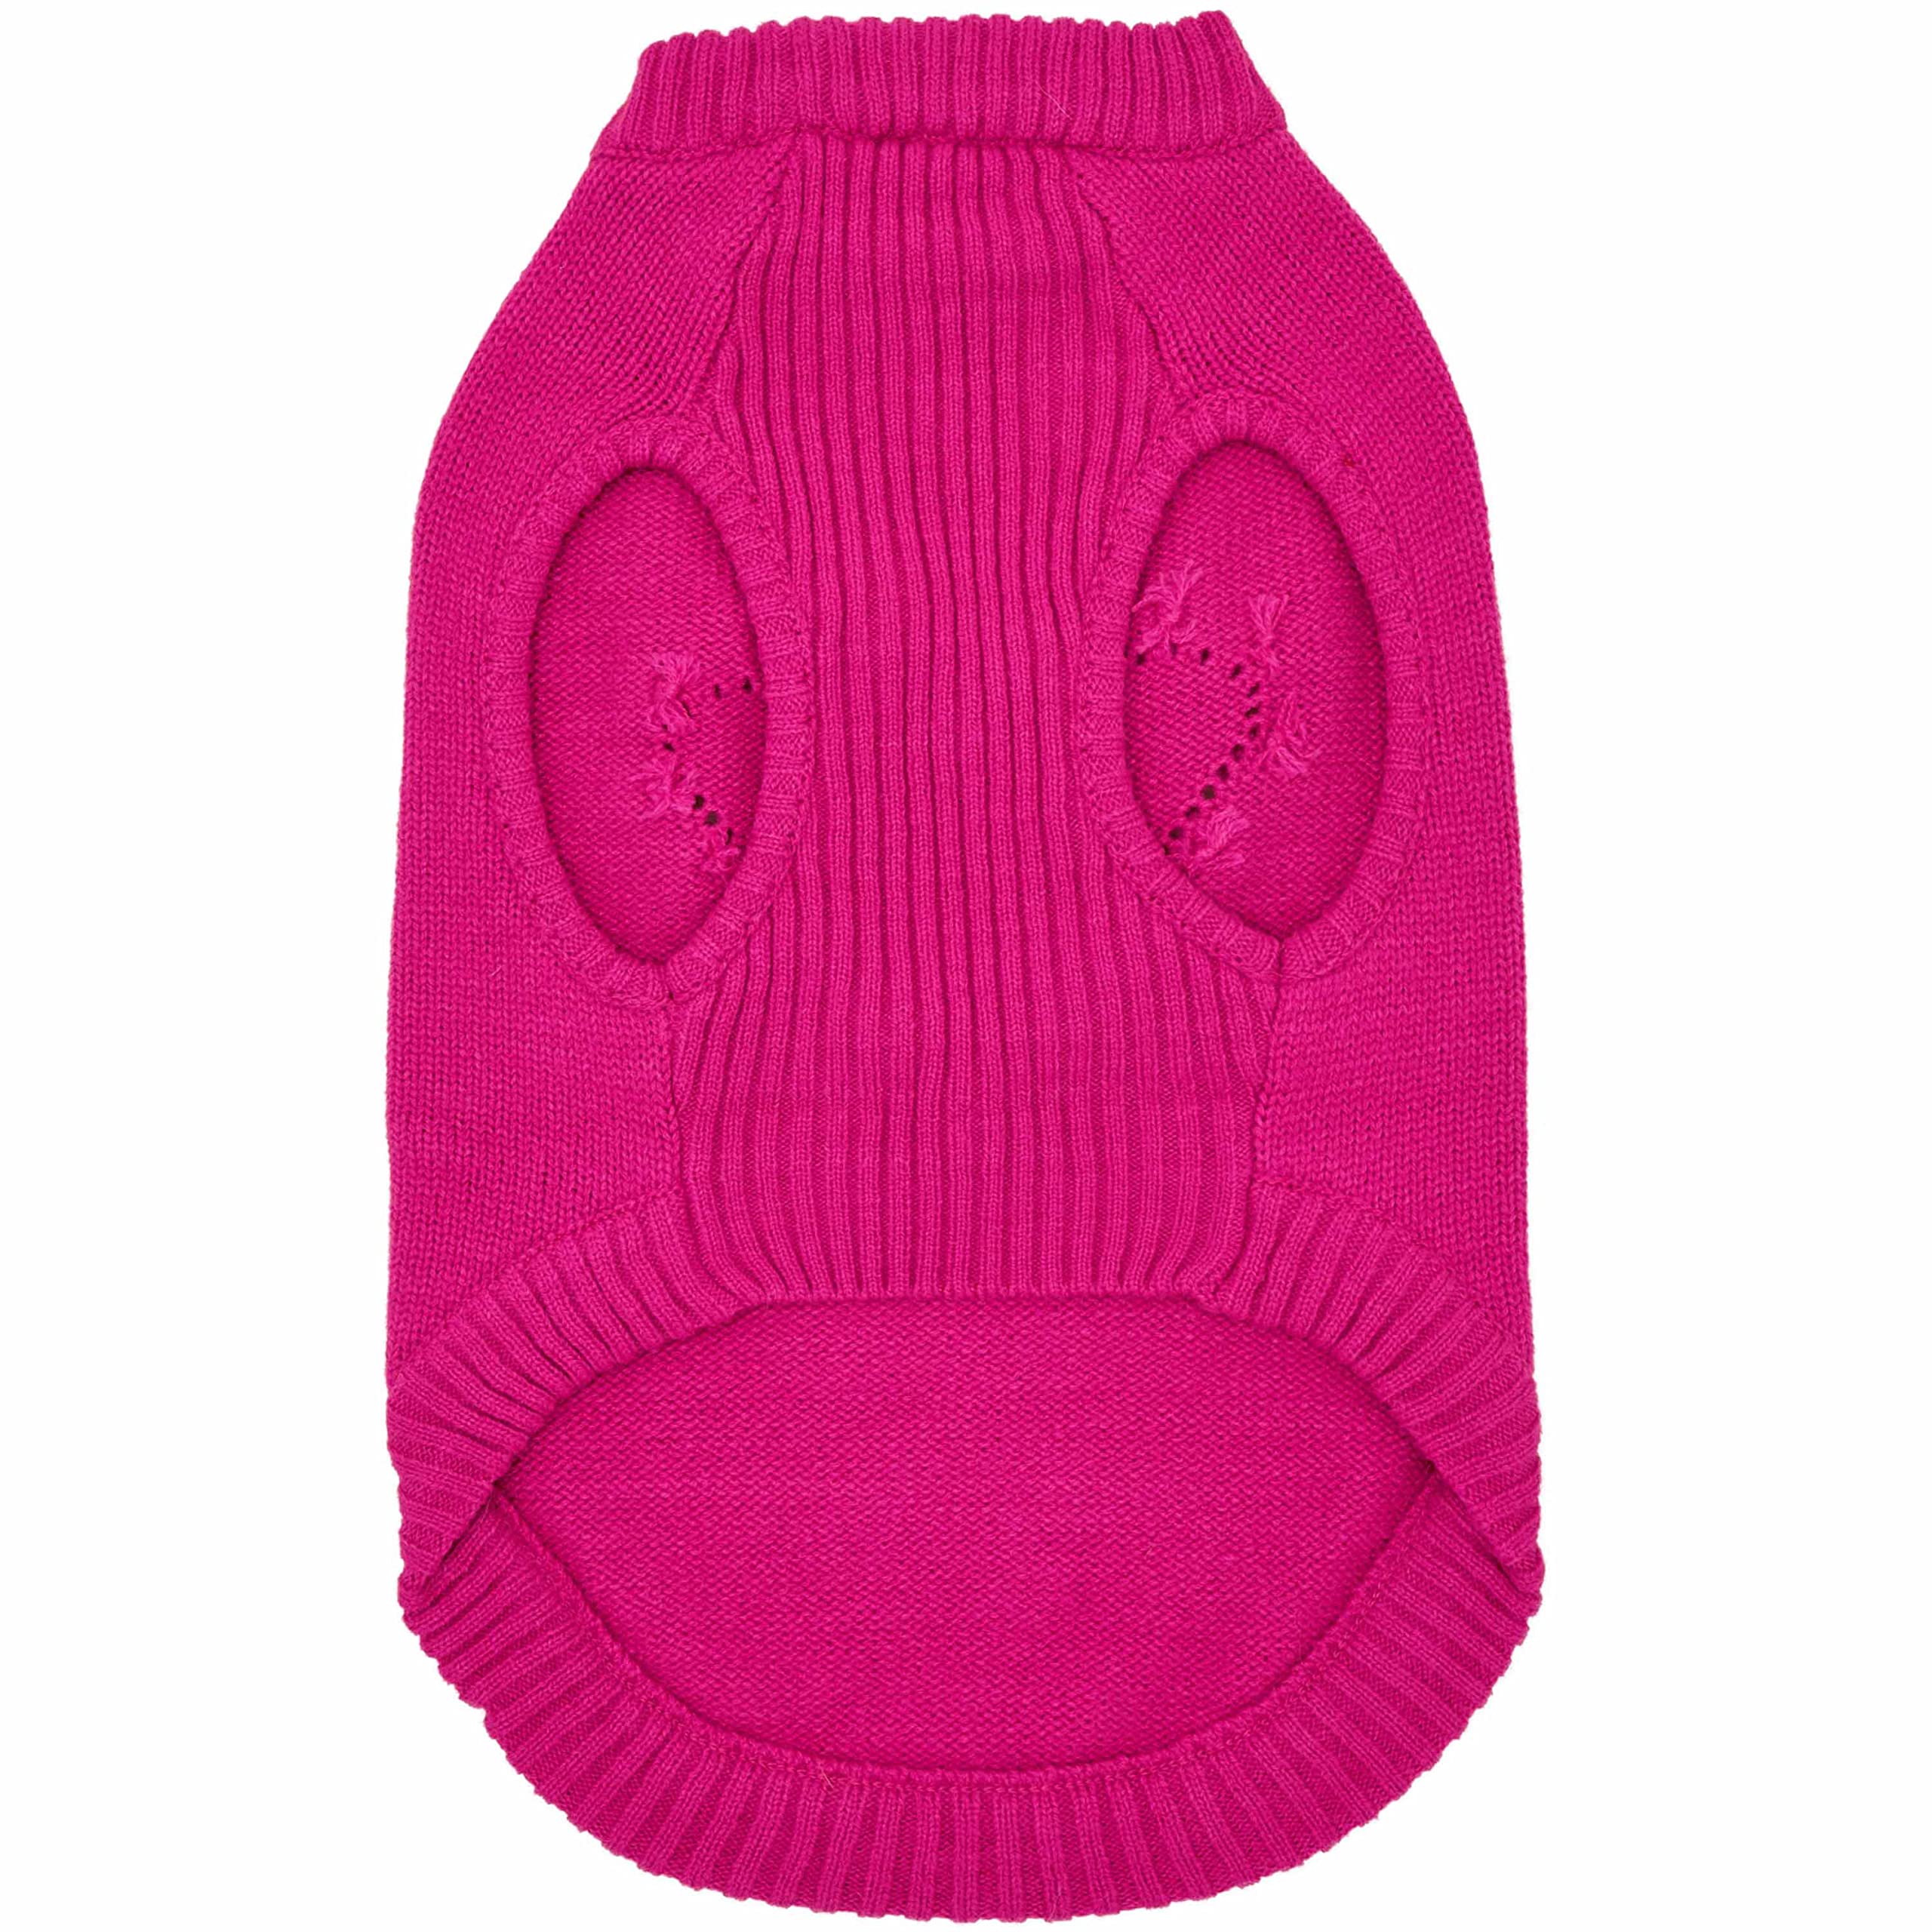 Blueberry Pet 2023 New Heart Dog Sweater Valentine’s Day Clothes for Small Girl Dogs, Hot Pink Pullover Crewneck Holiday Apparel, Back Length 8”